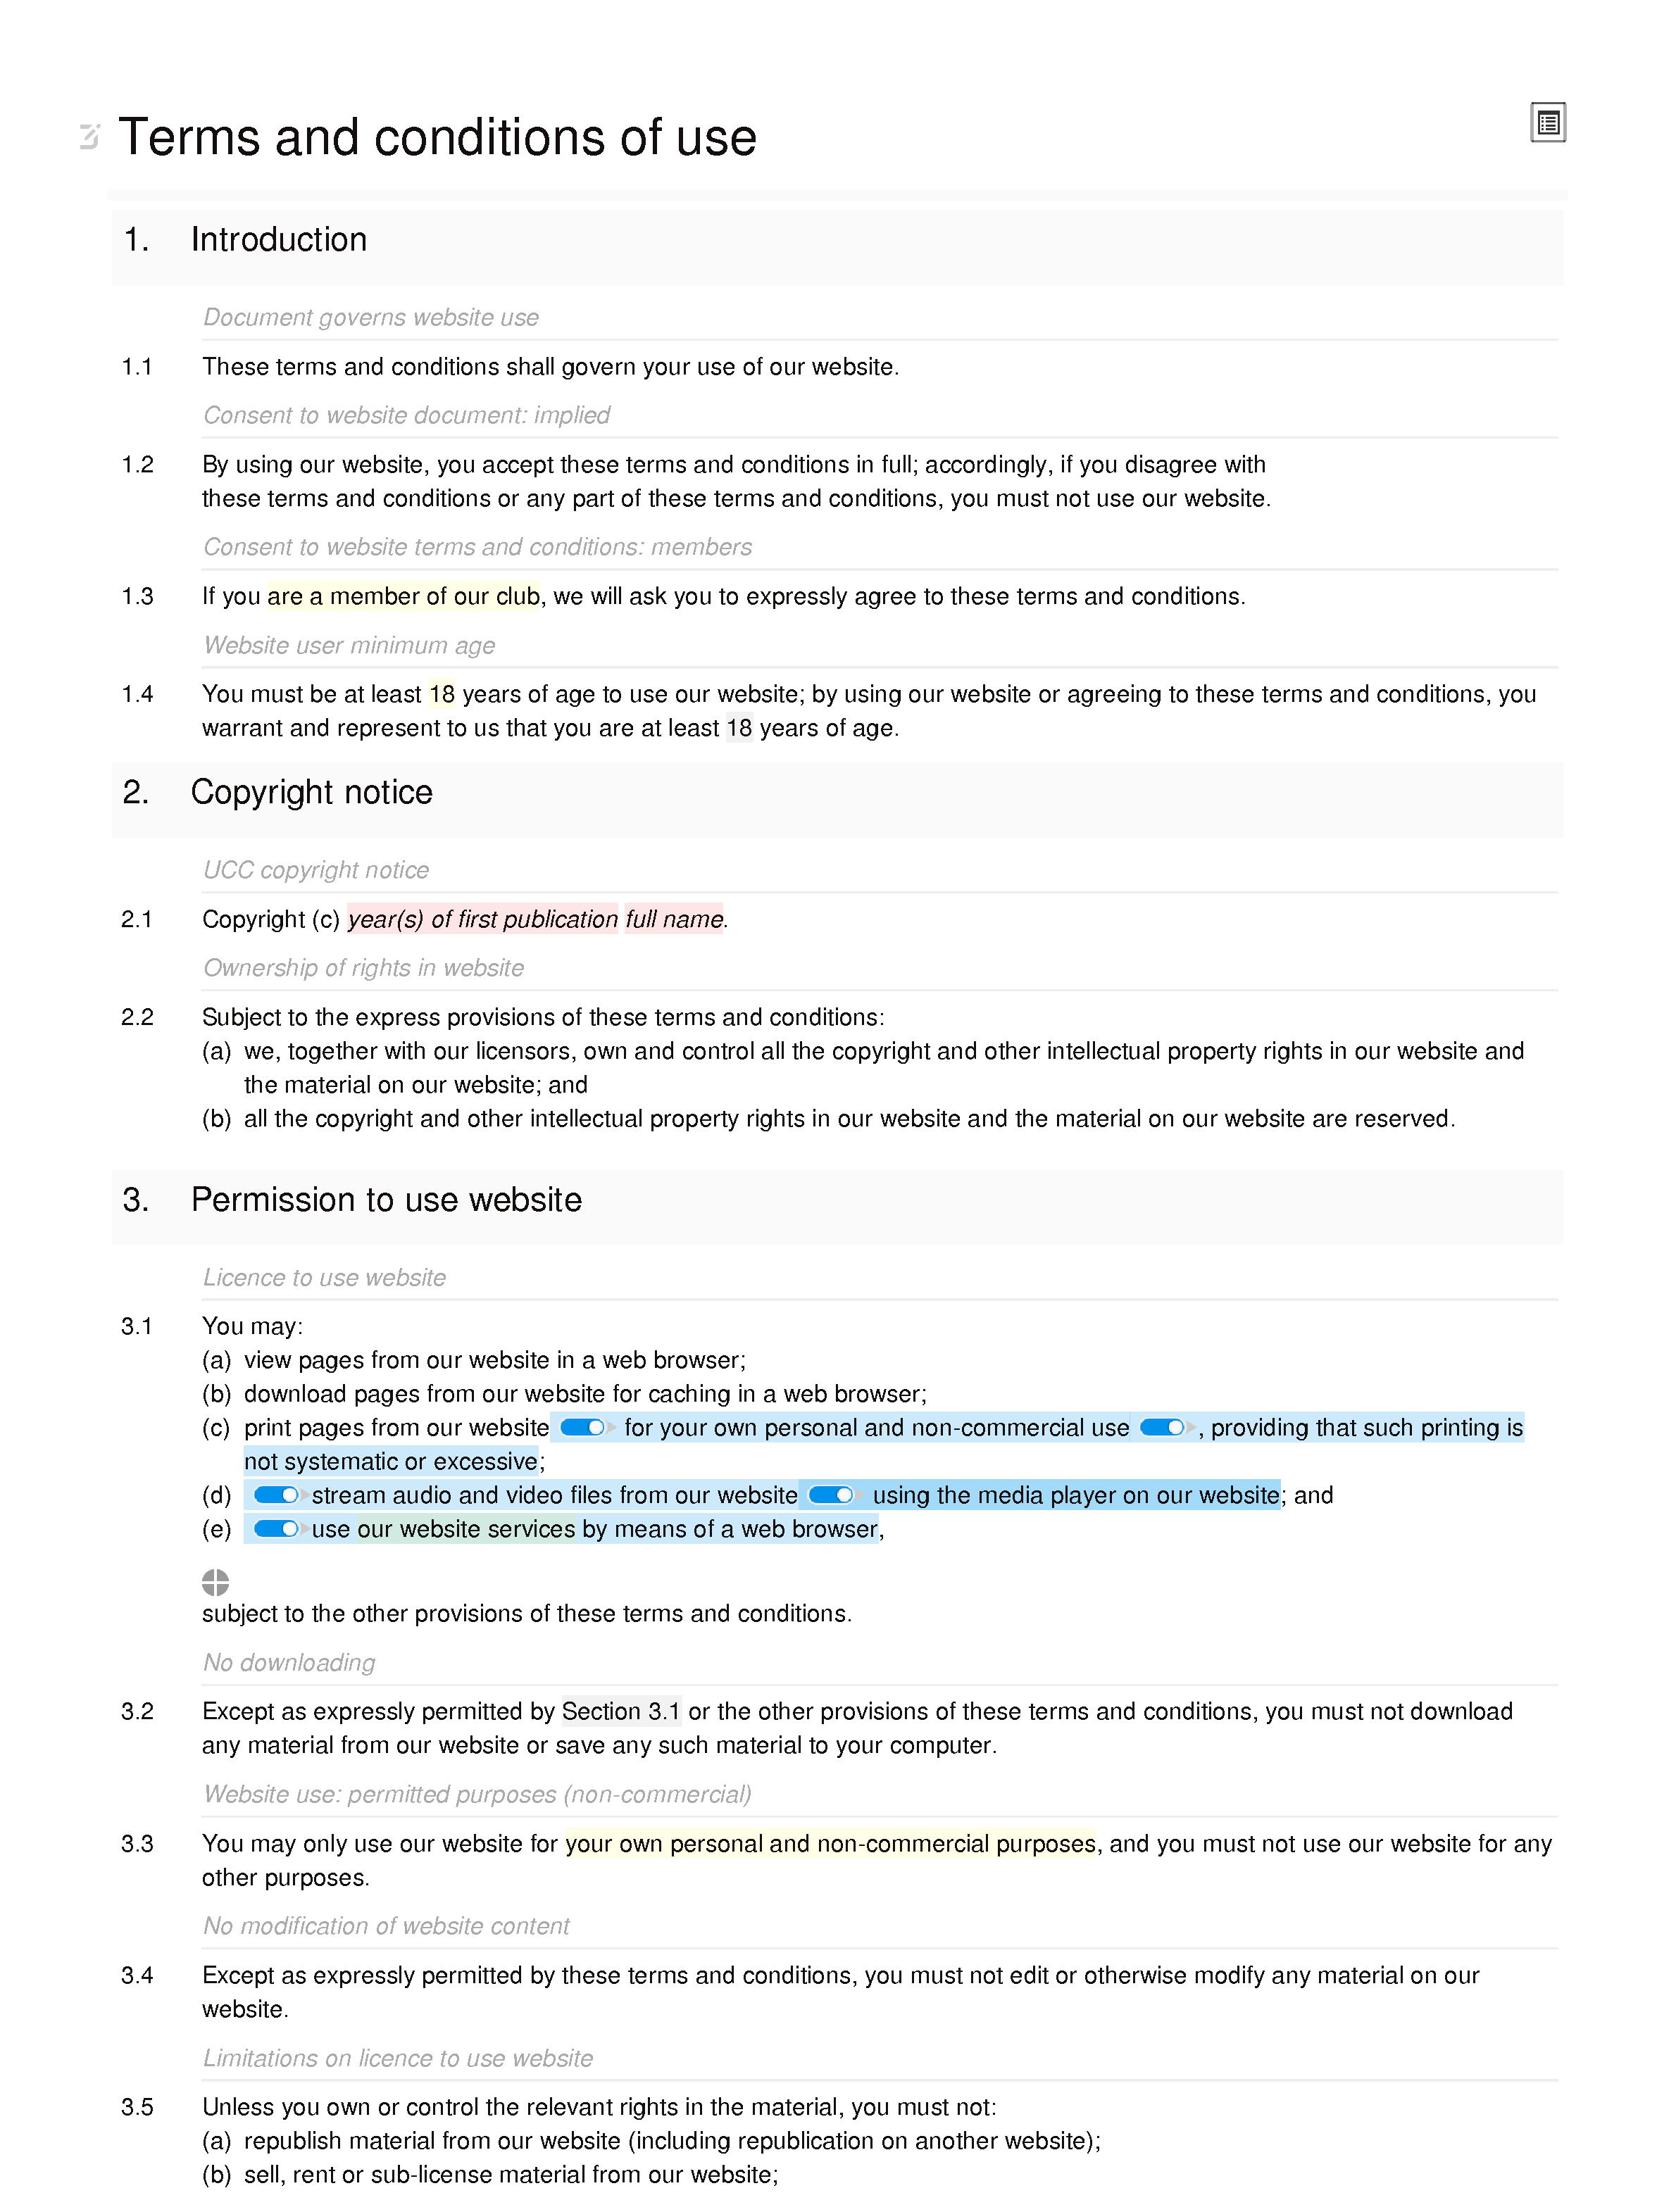 Club website terms and conditions document editor preview